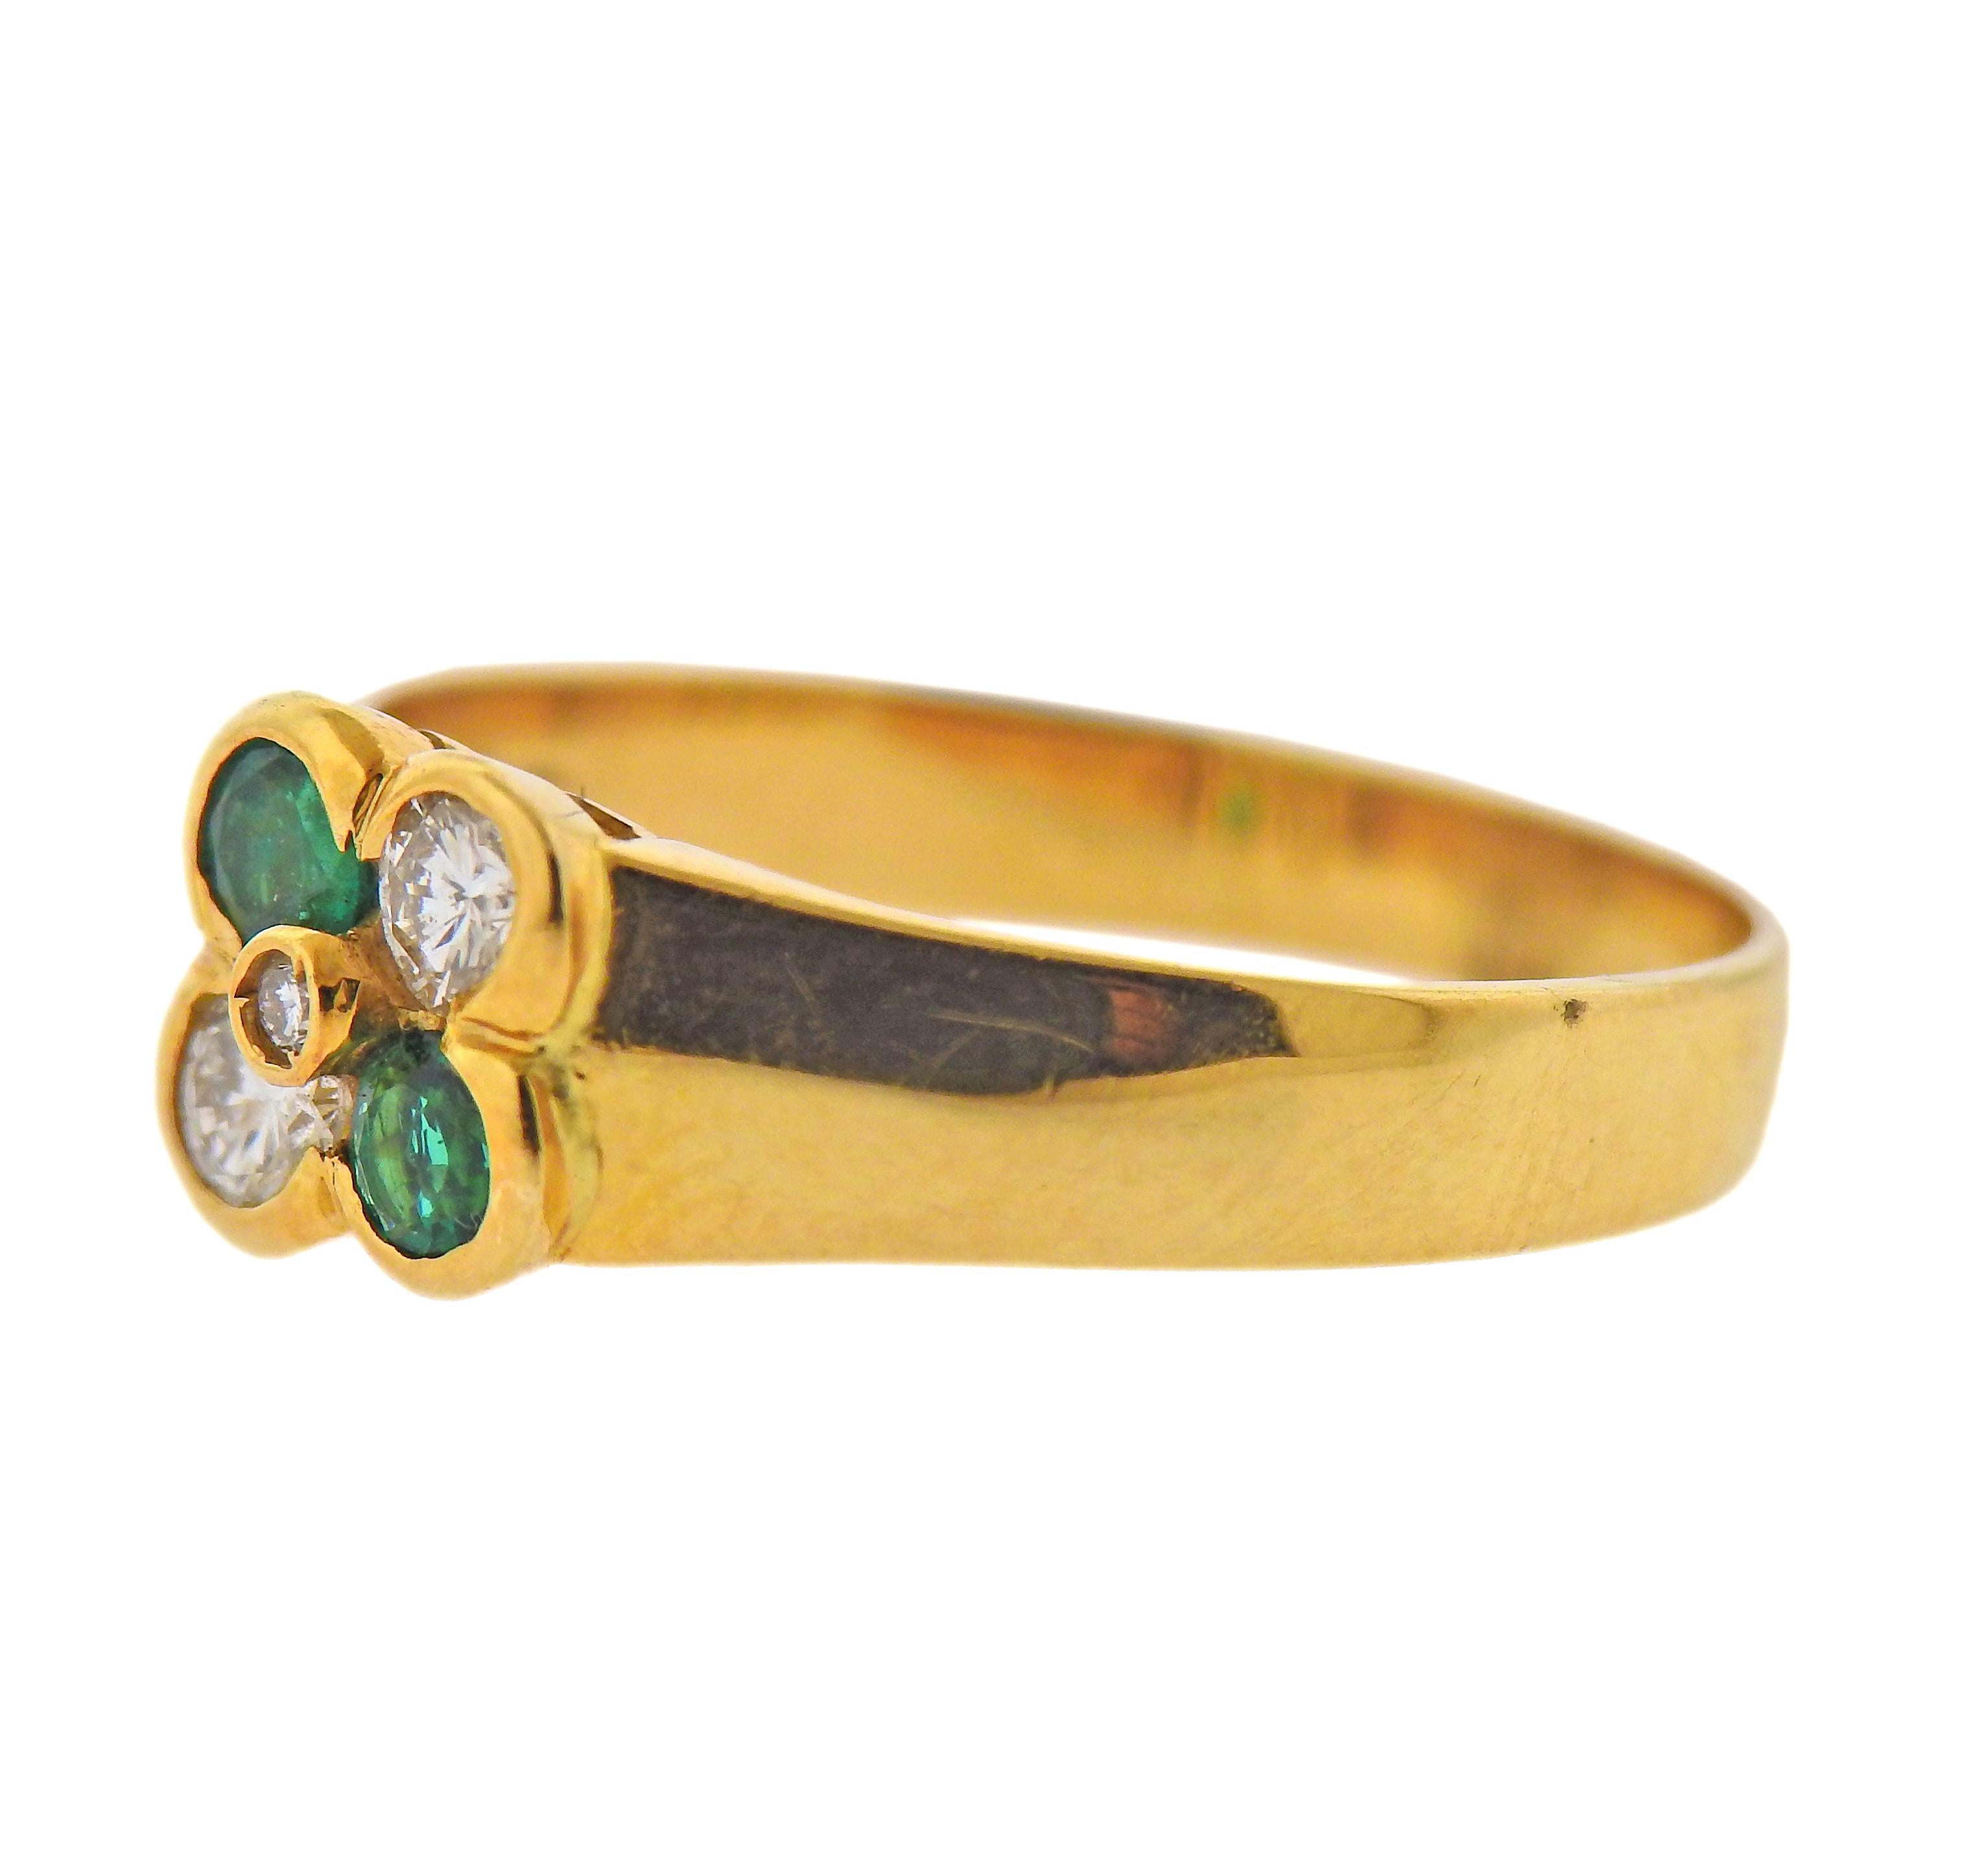 18k gold ring with flower top, adorned with emeralds and approx. 0.21ct in diamonds. Ring size - 7, ring top - 7.3mm wide. Marked: 750, Italian mark. Weight - 3.2 grams. 